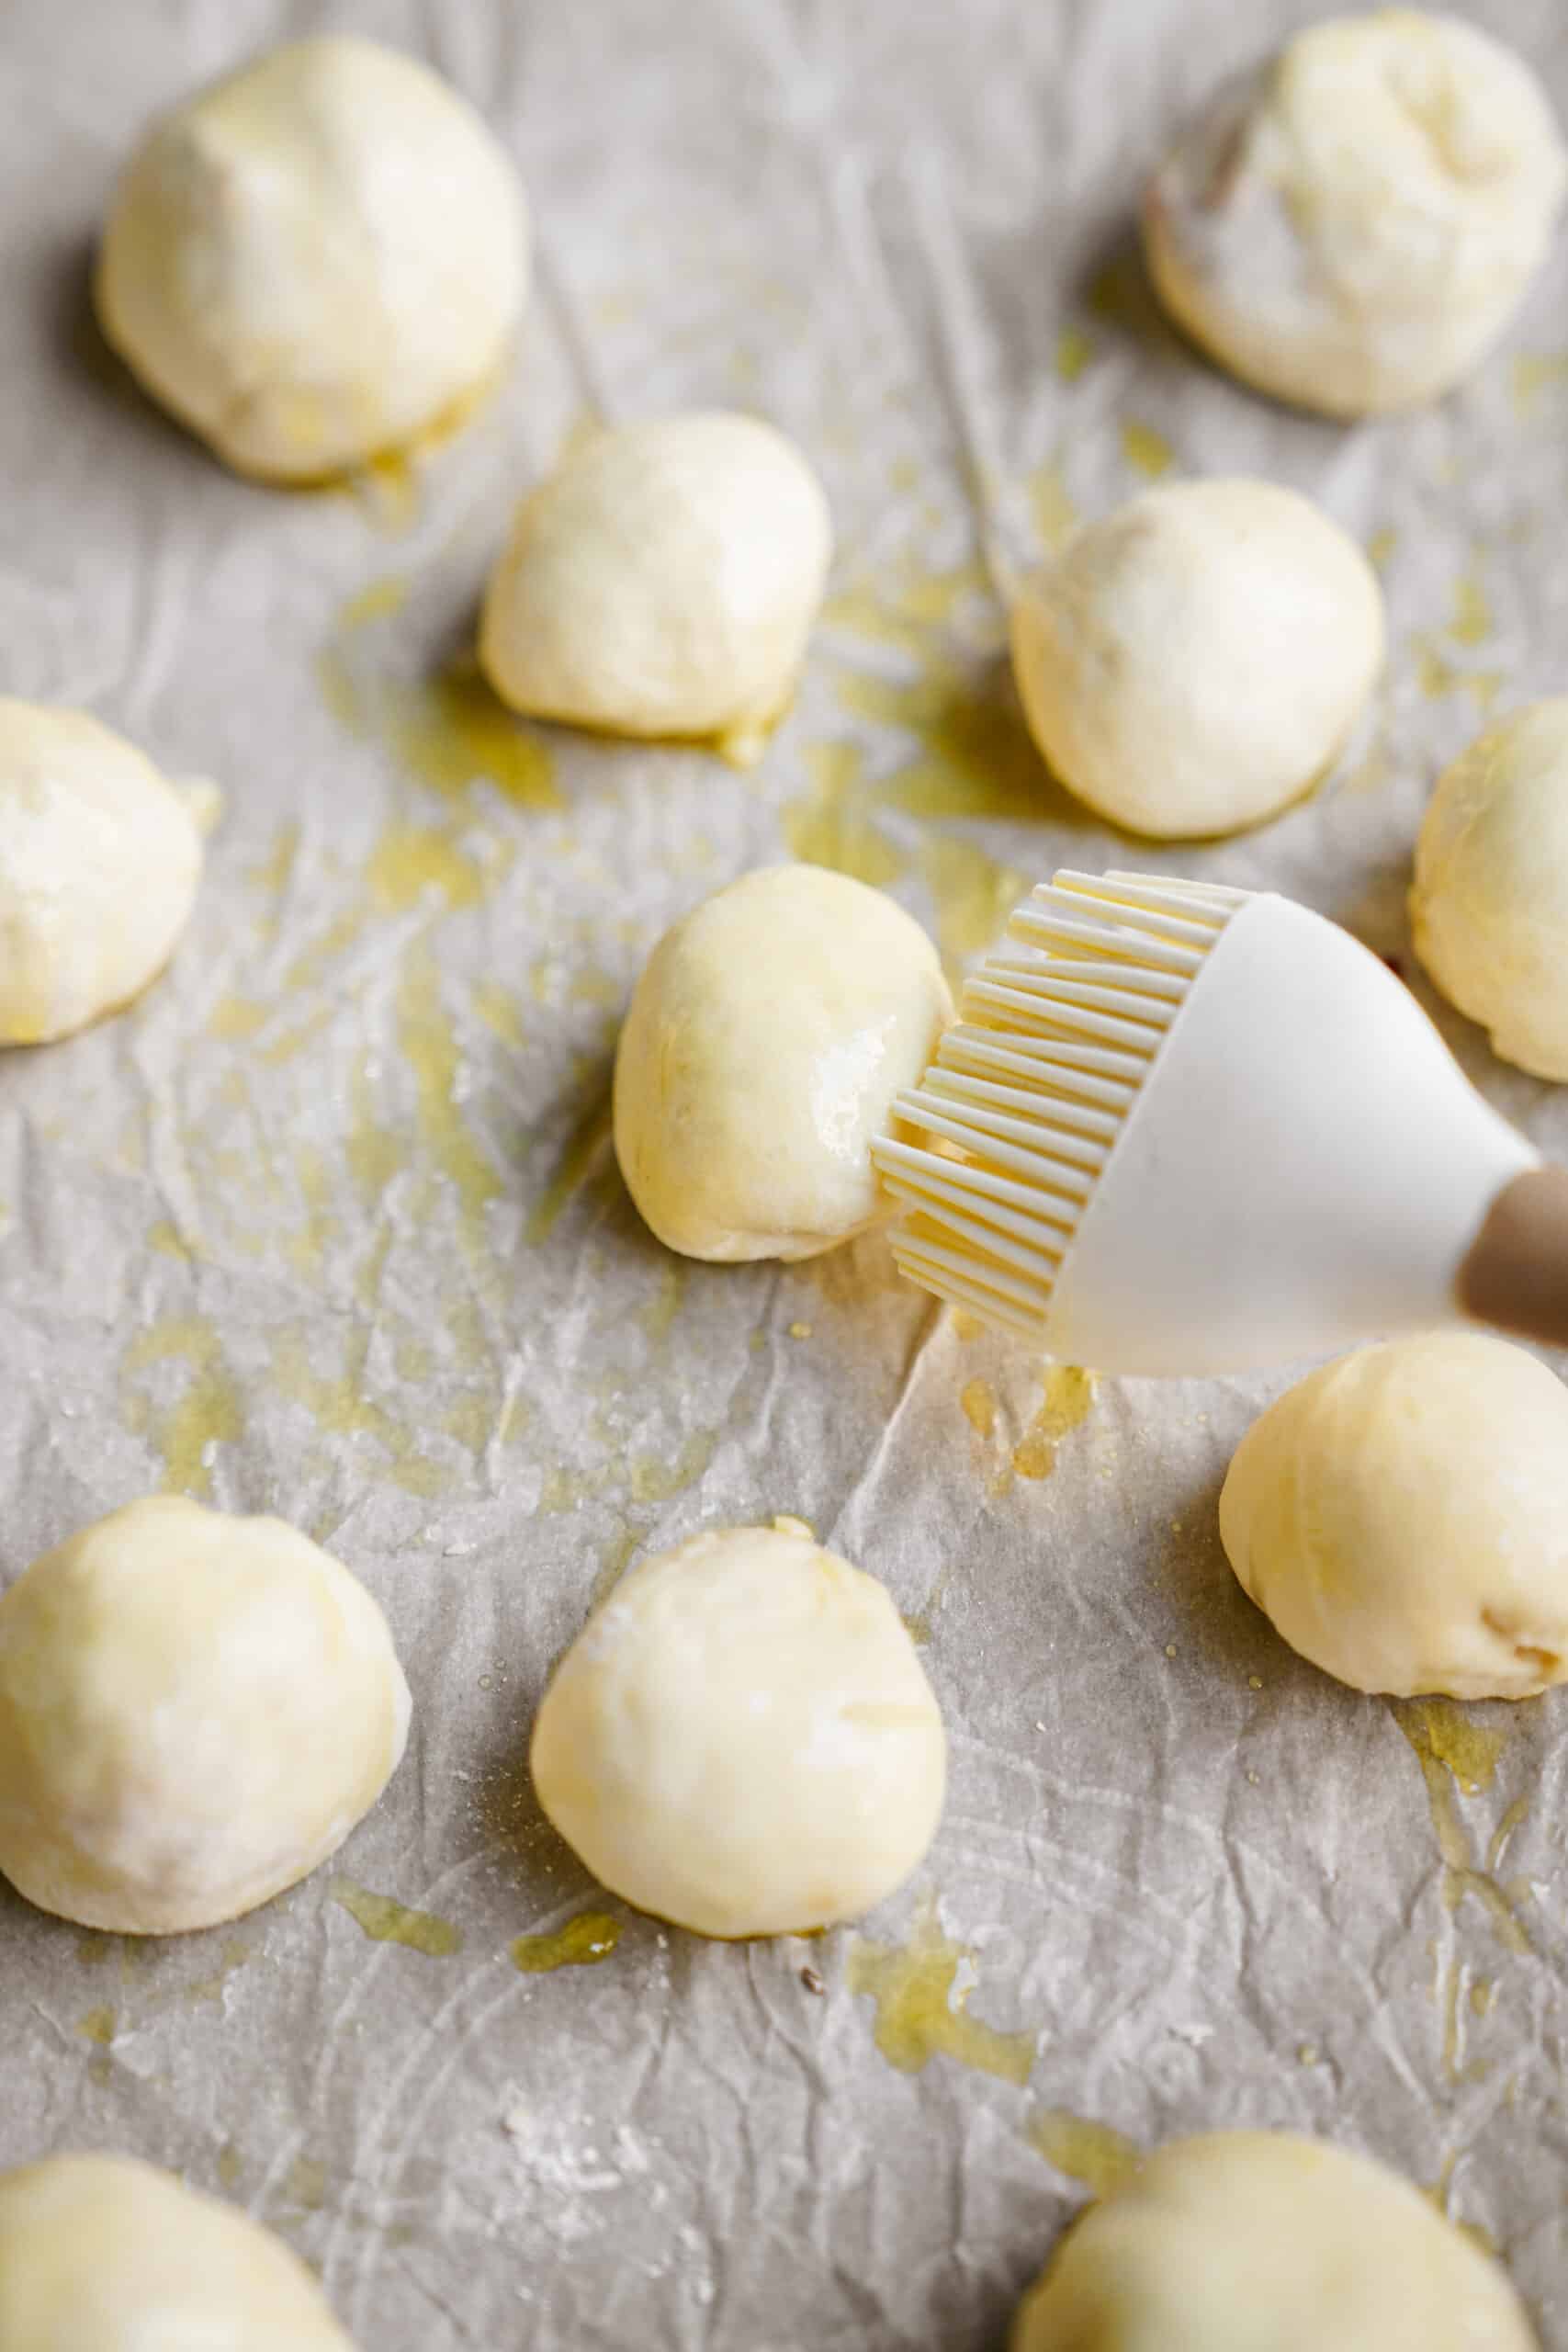 Pizza pockets being brushed with olive oil